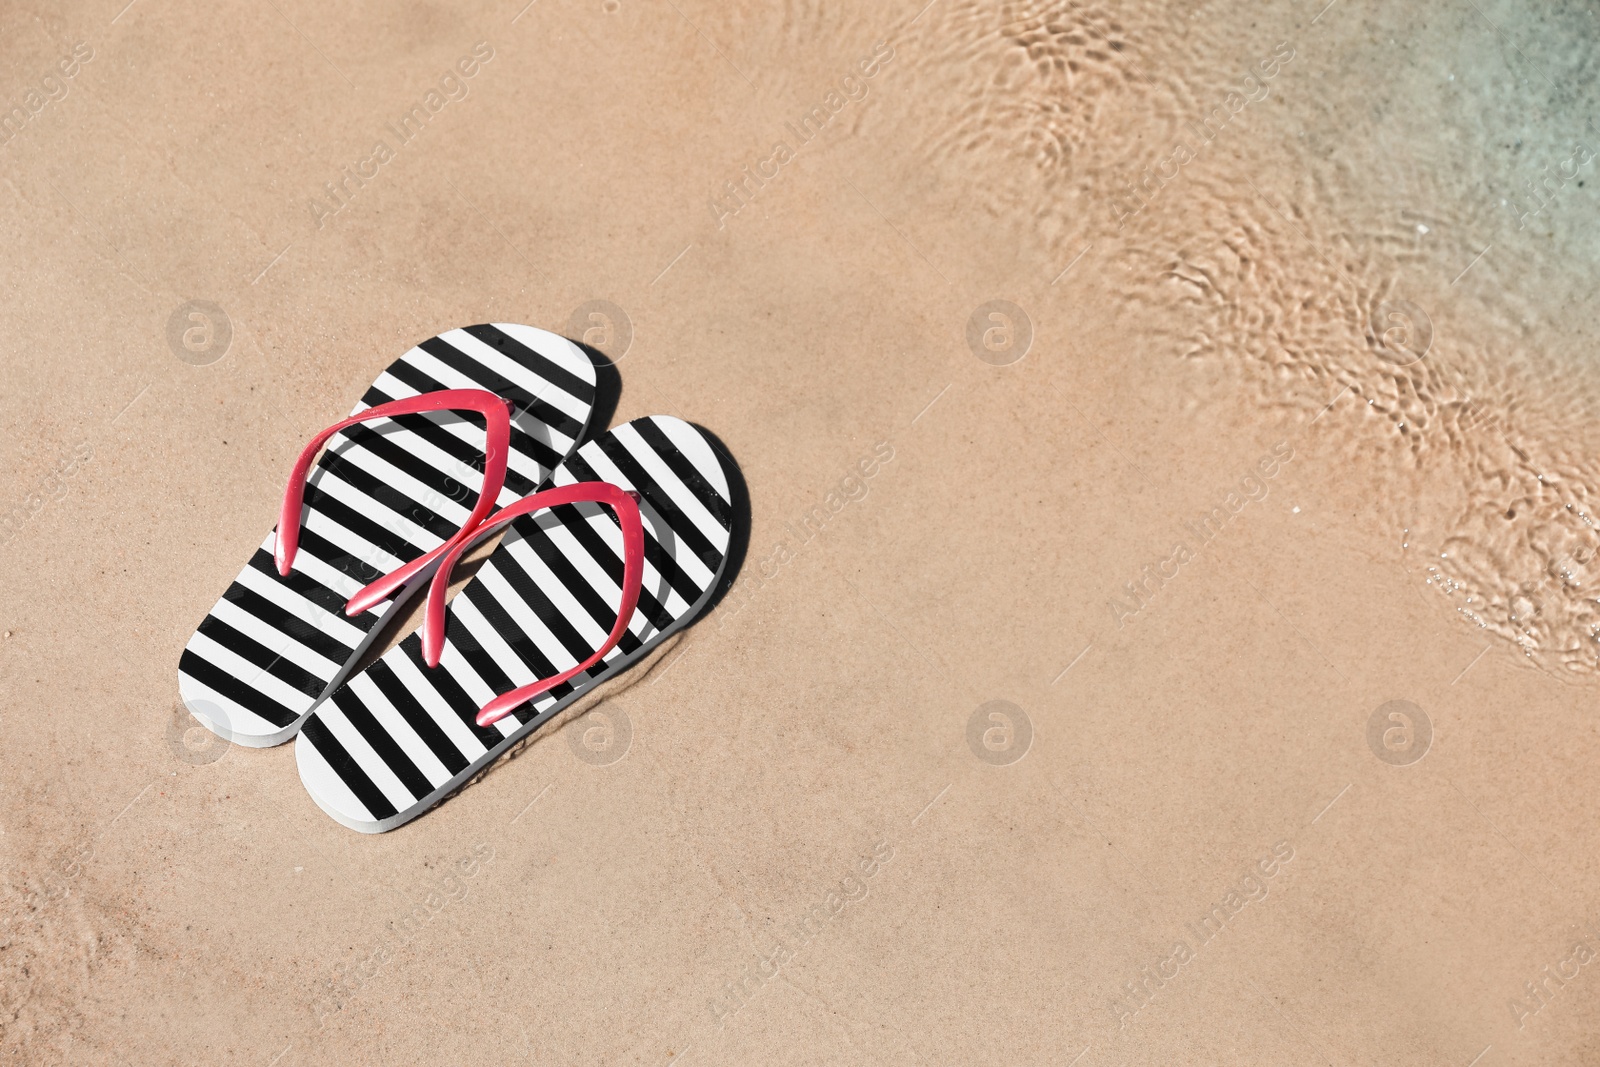 Photo of Stylish flip flops on sandy beach near sea, above view. Space for text